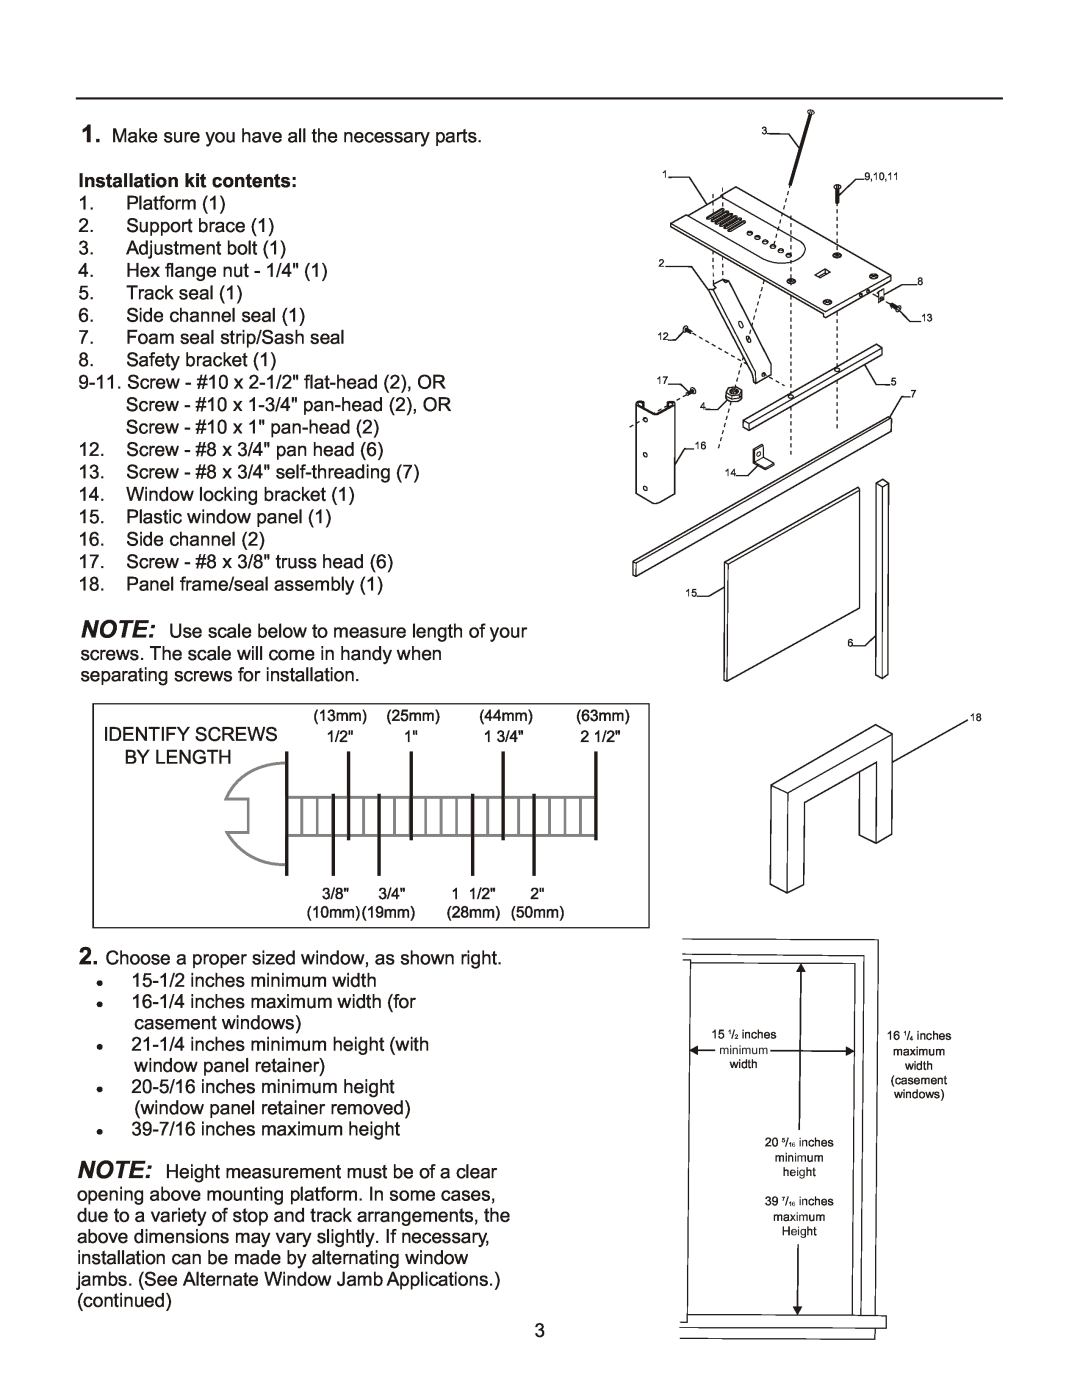 Frigidaire 2020213A0362 manual Installation kit contents 